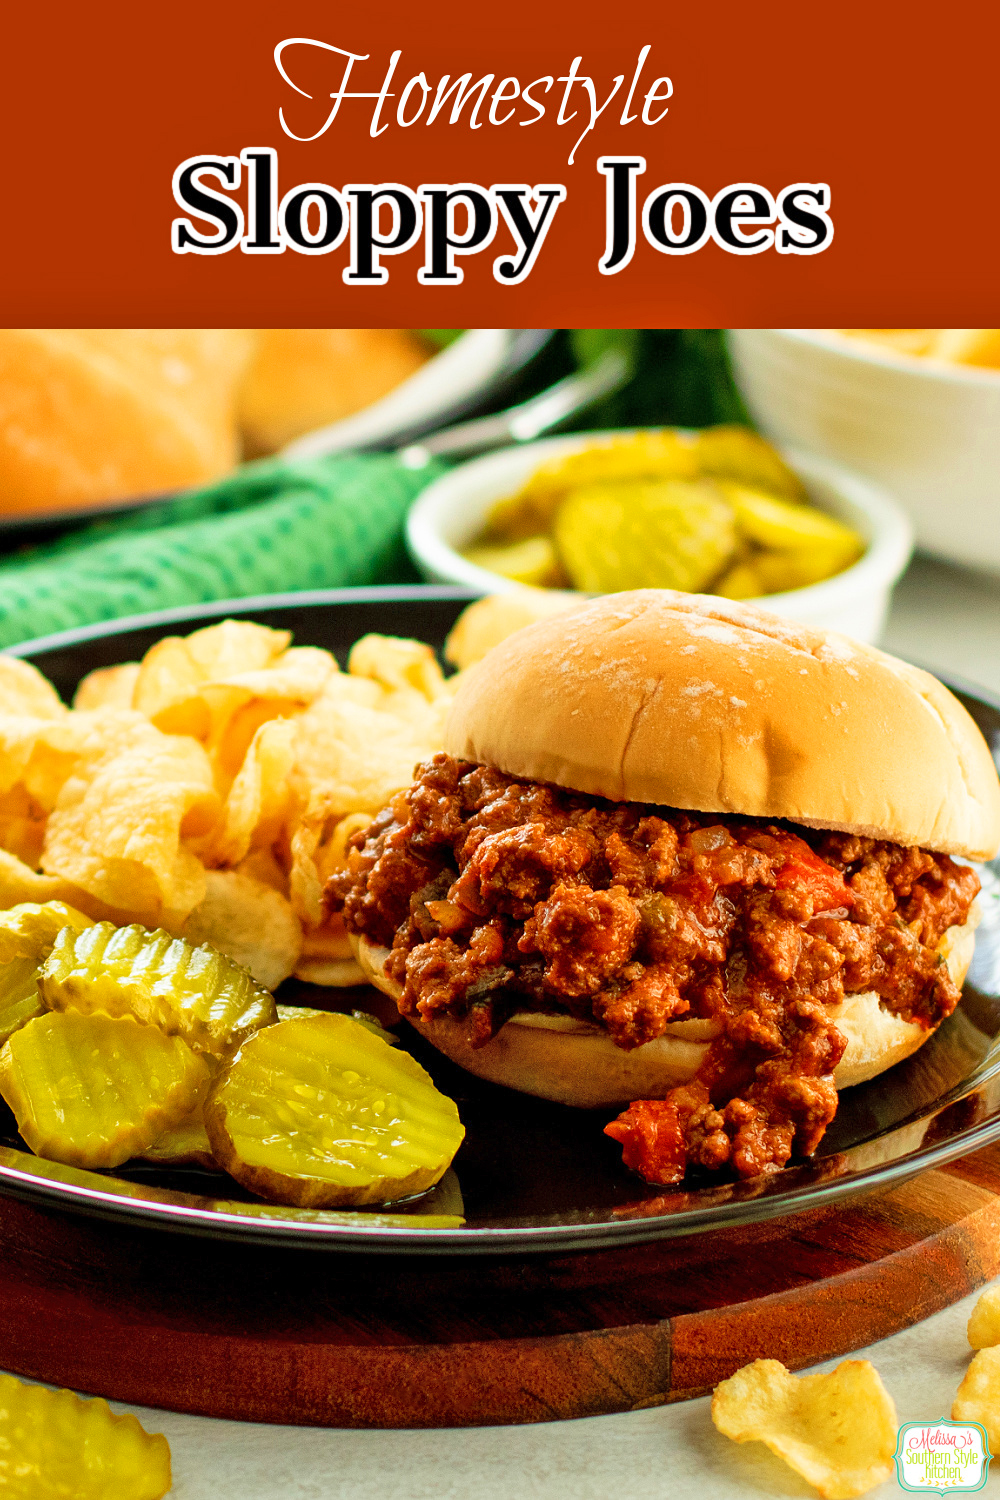 This Sloppy Joes recipe is just what you need for a simple supper after a hectic day. Stuff the rich filling into warm rolls and devour #sloppyjoes #easygroundbeefrecipes #smokyjoes #easysloppyjoes #homemadesloppyjoes